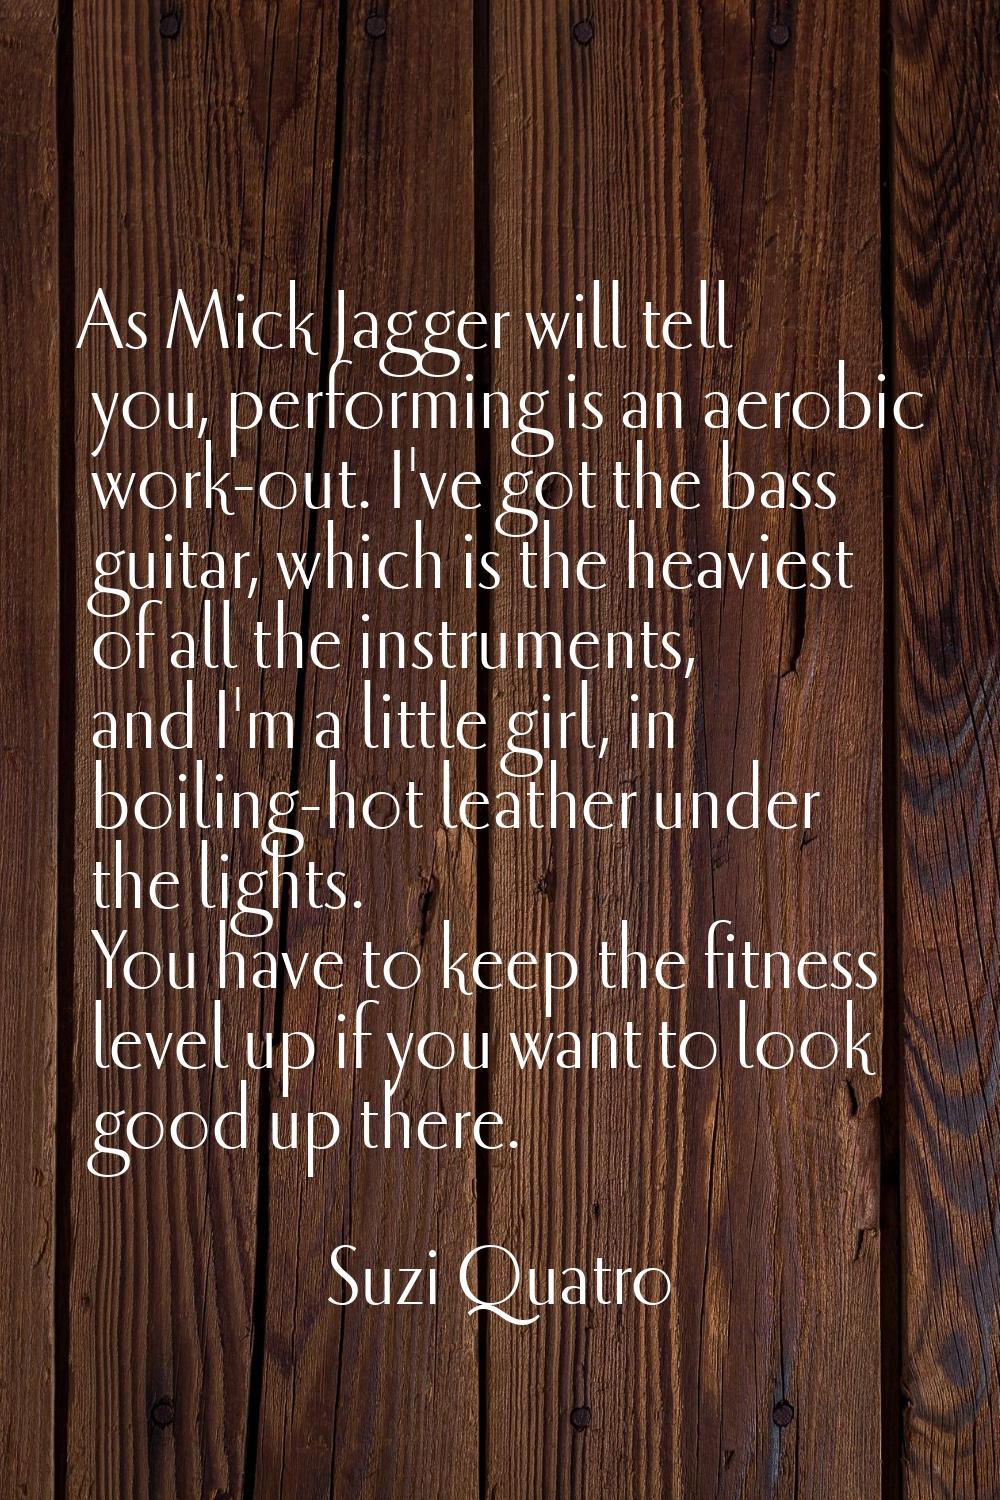 As Mick Jagger will tell you, performing is an aerobic work-out. I've got the bass guitar, which is